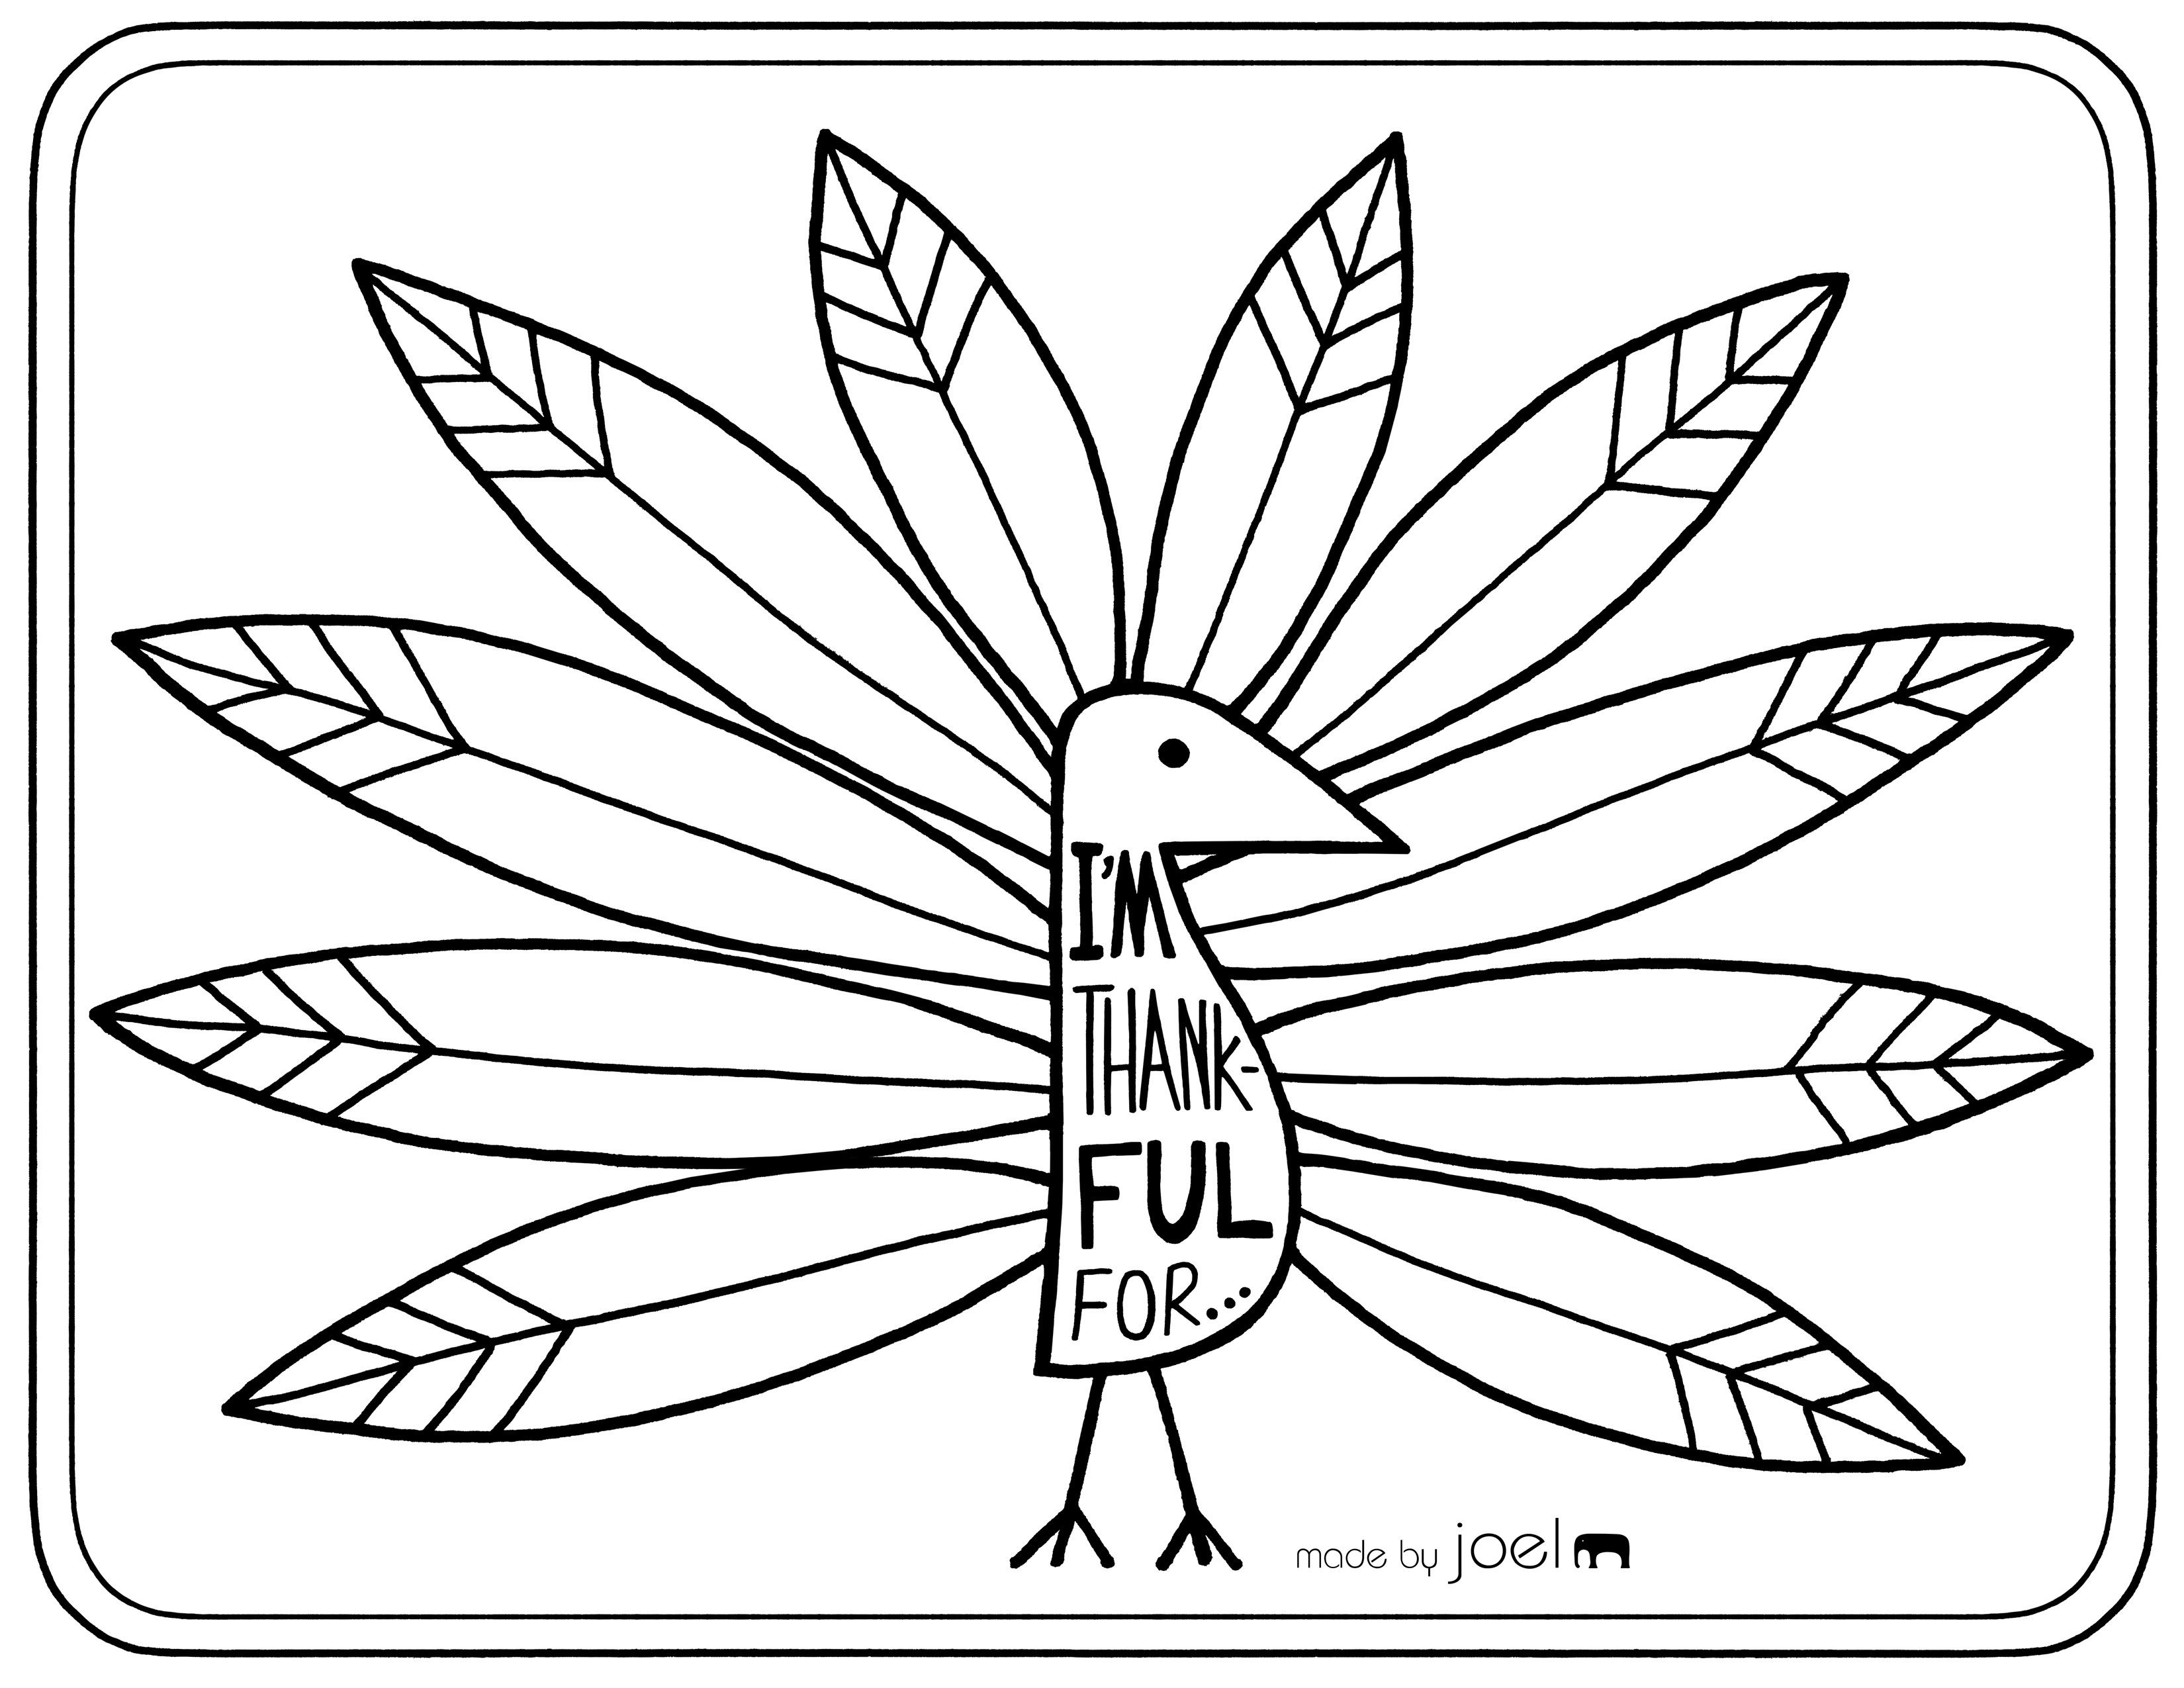 Free Printable Placemat For Giving Thanks | Fall Crafts &amp;amp; Ideas - Free Printable Thanksgiving Turkey Template